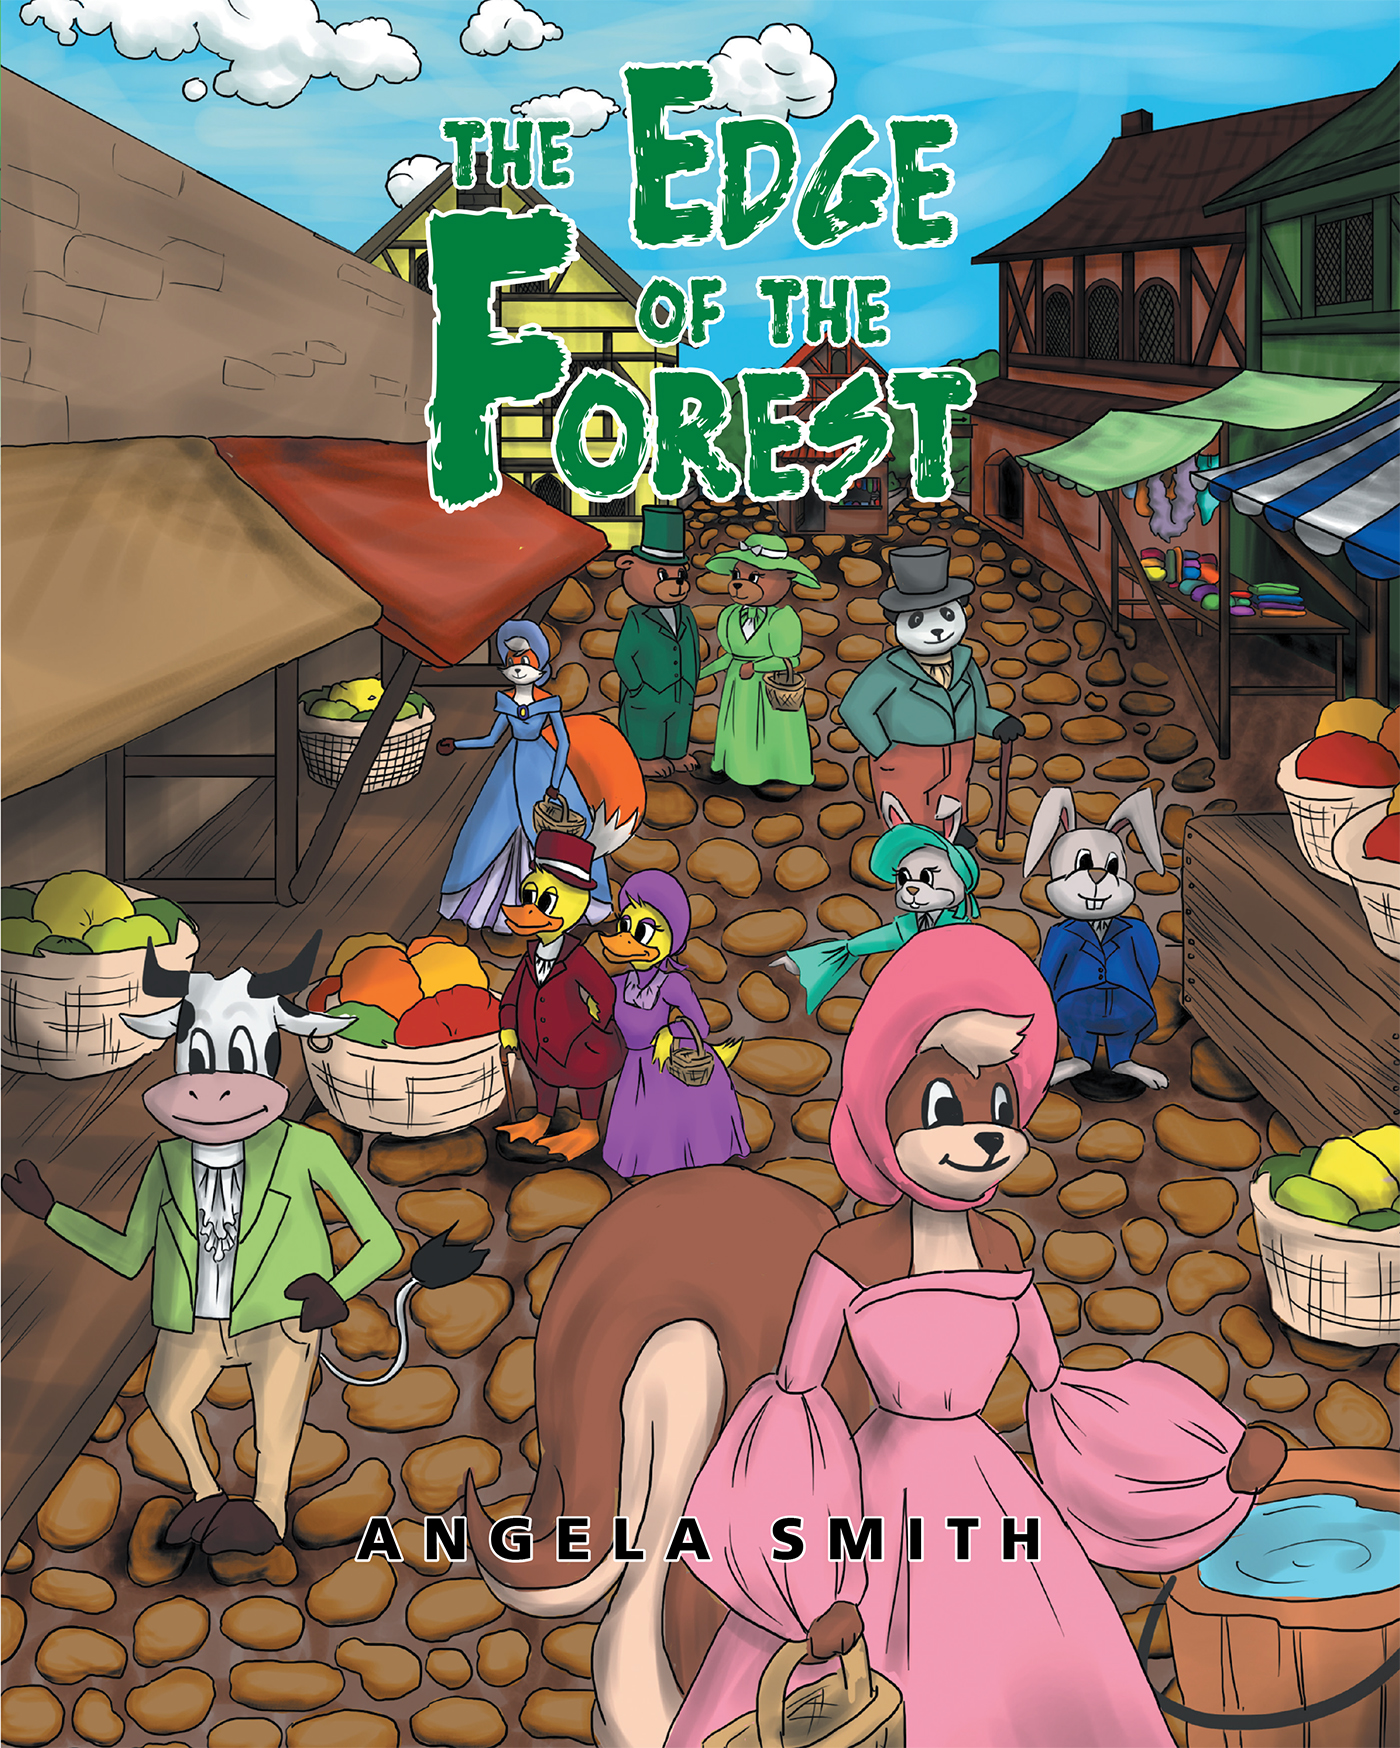 The Edge of the Forest Cover Image